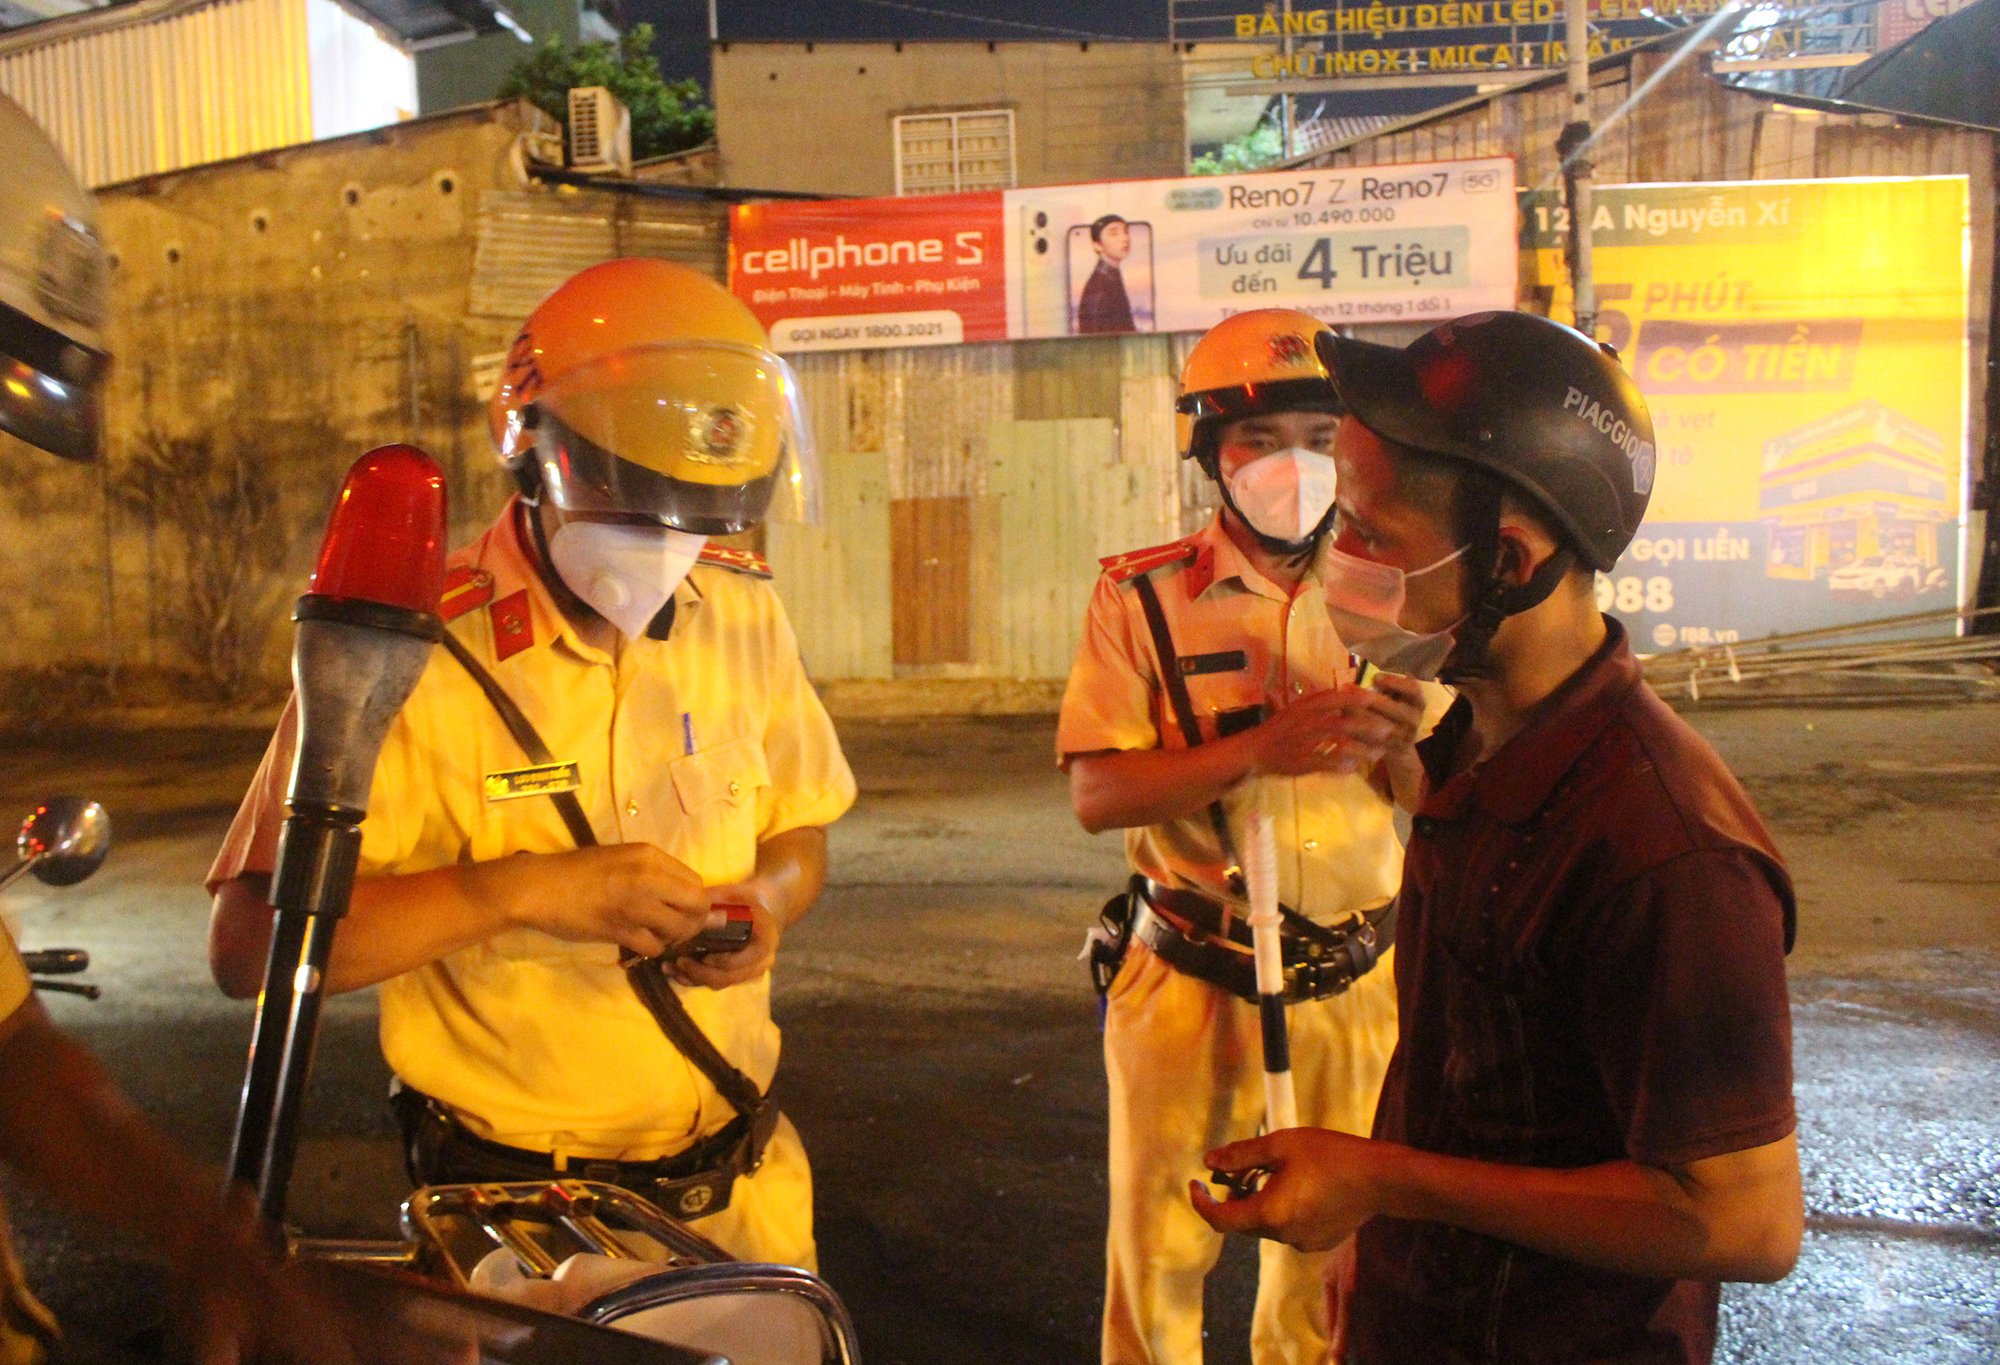 Ho Chi Minh City: Ma men drove cars to run away, asking 2 girls to intervene when they saw the traffic police - Photo 4.